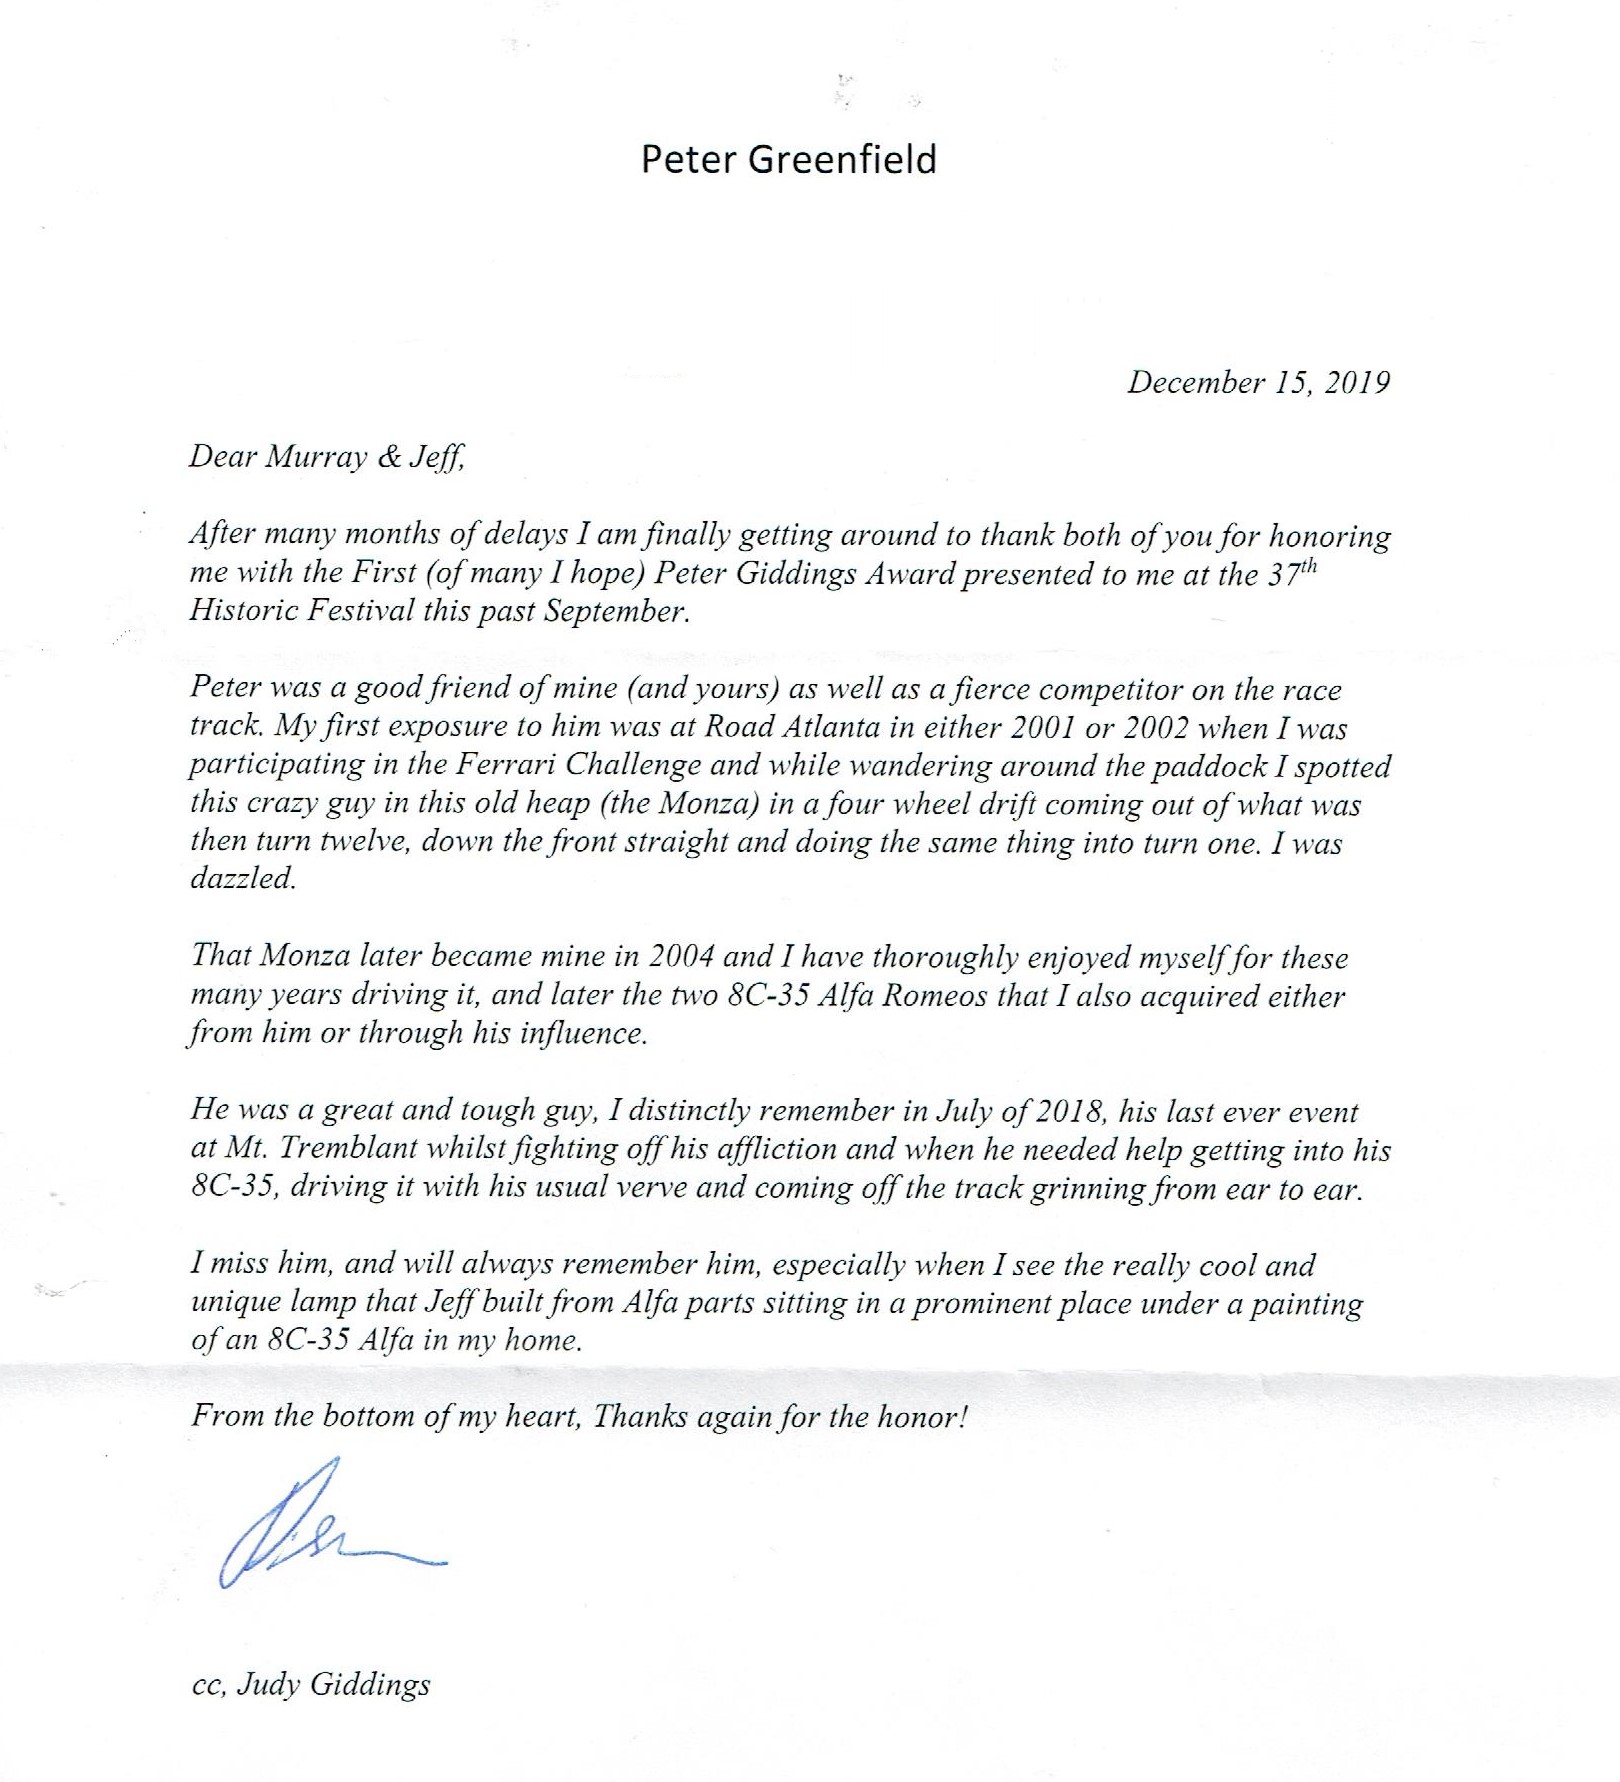 Greenfield Letter